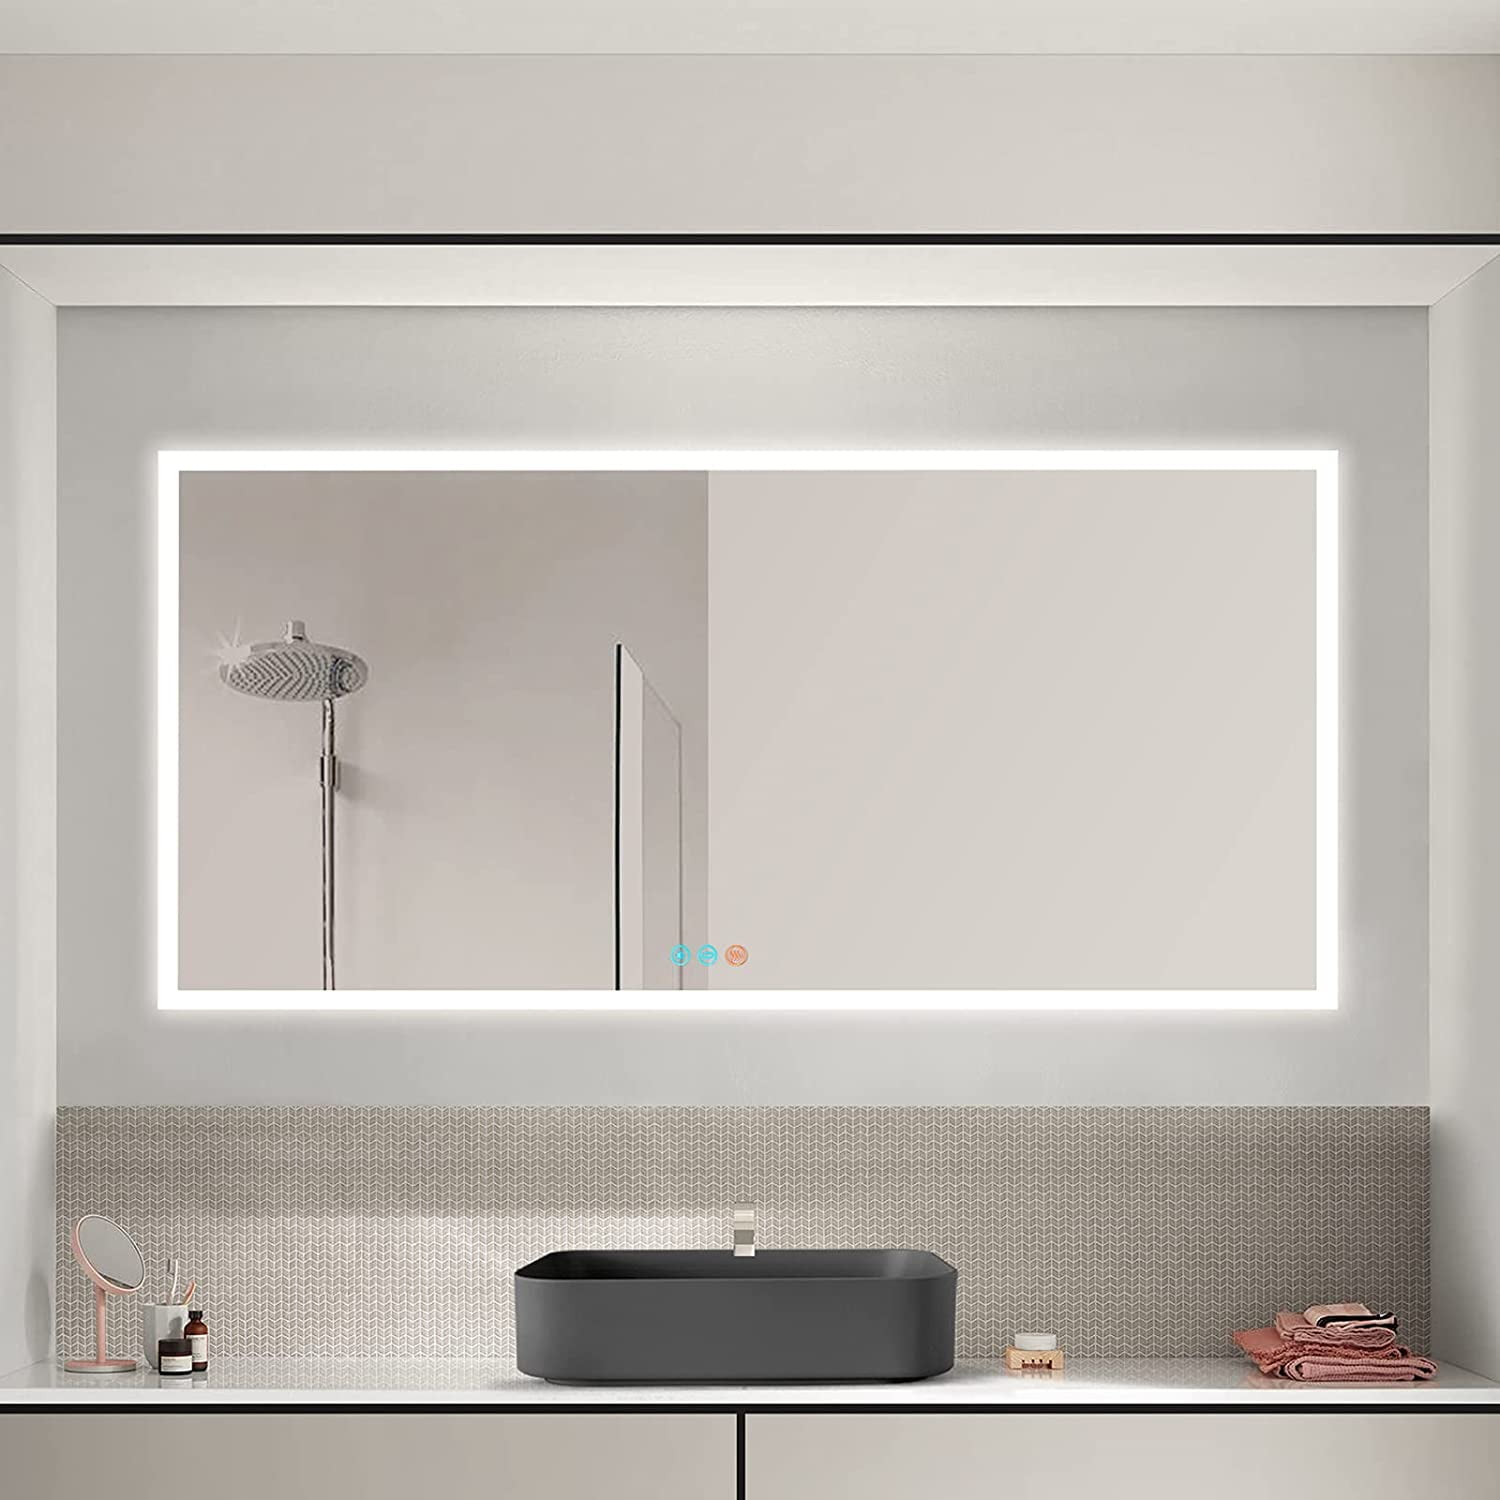 Portable Travel Anti Fog Wall Mounted Hanging Mirror Approx 17 x 13cm Bathroom Mirror for Shaving and Makeup Acrylic Fogproof Shatterproof Shower Mirror